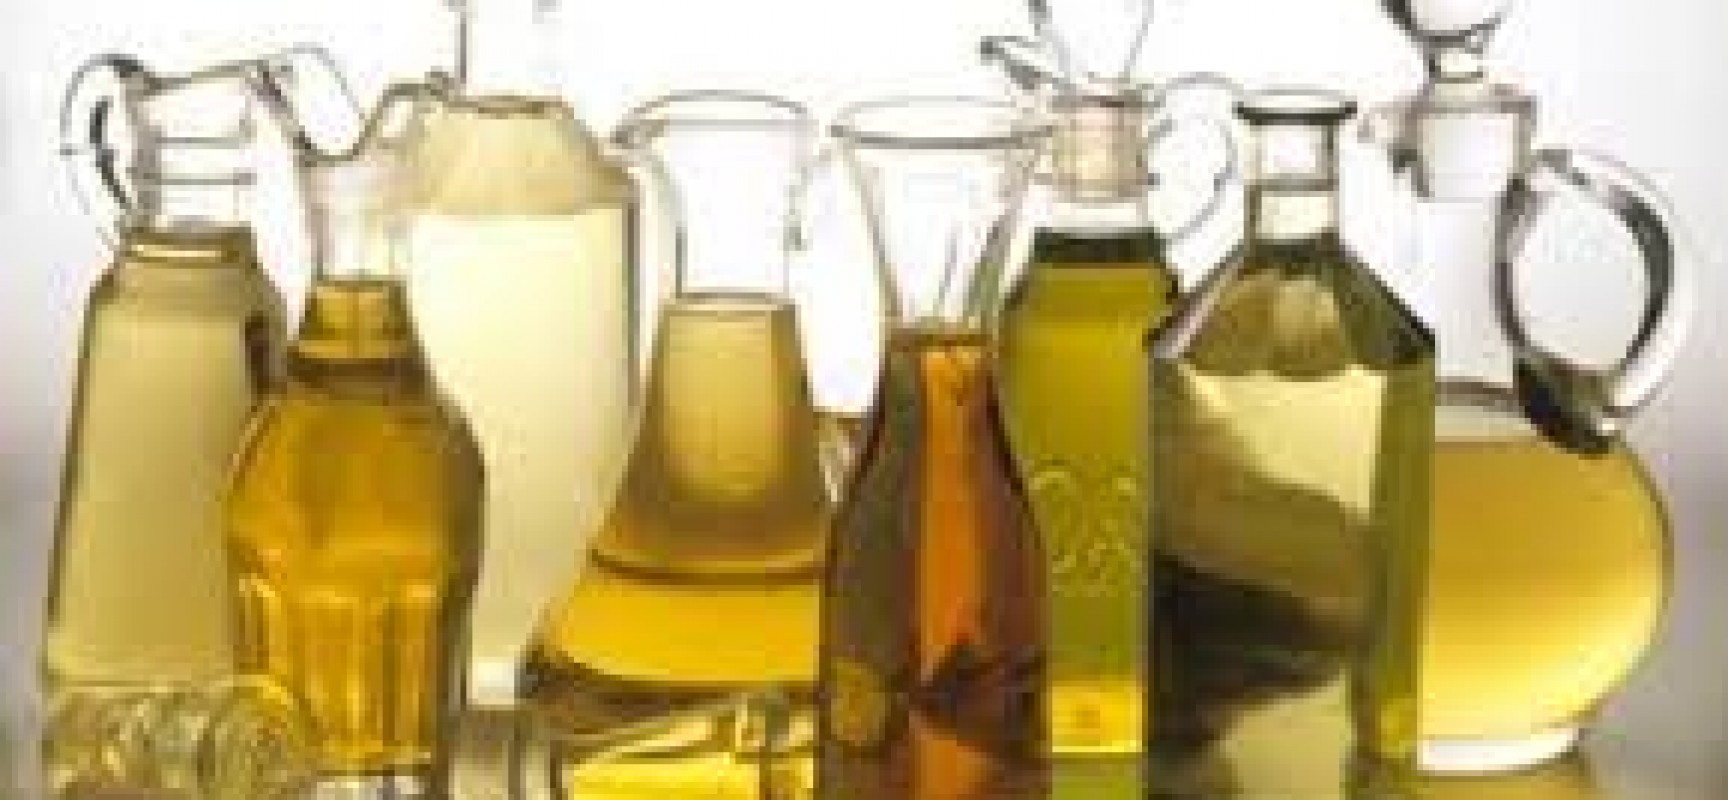 Oils: The Most Basic Ingredient in our Dishes